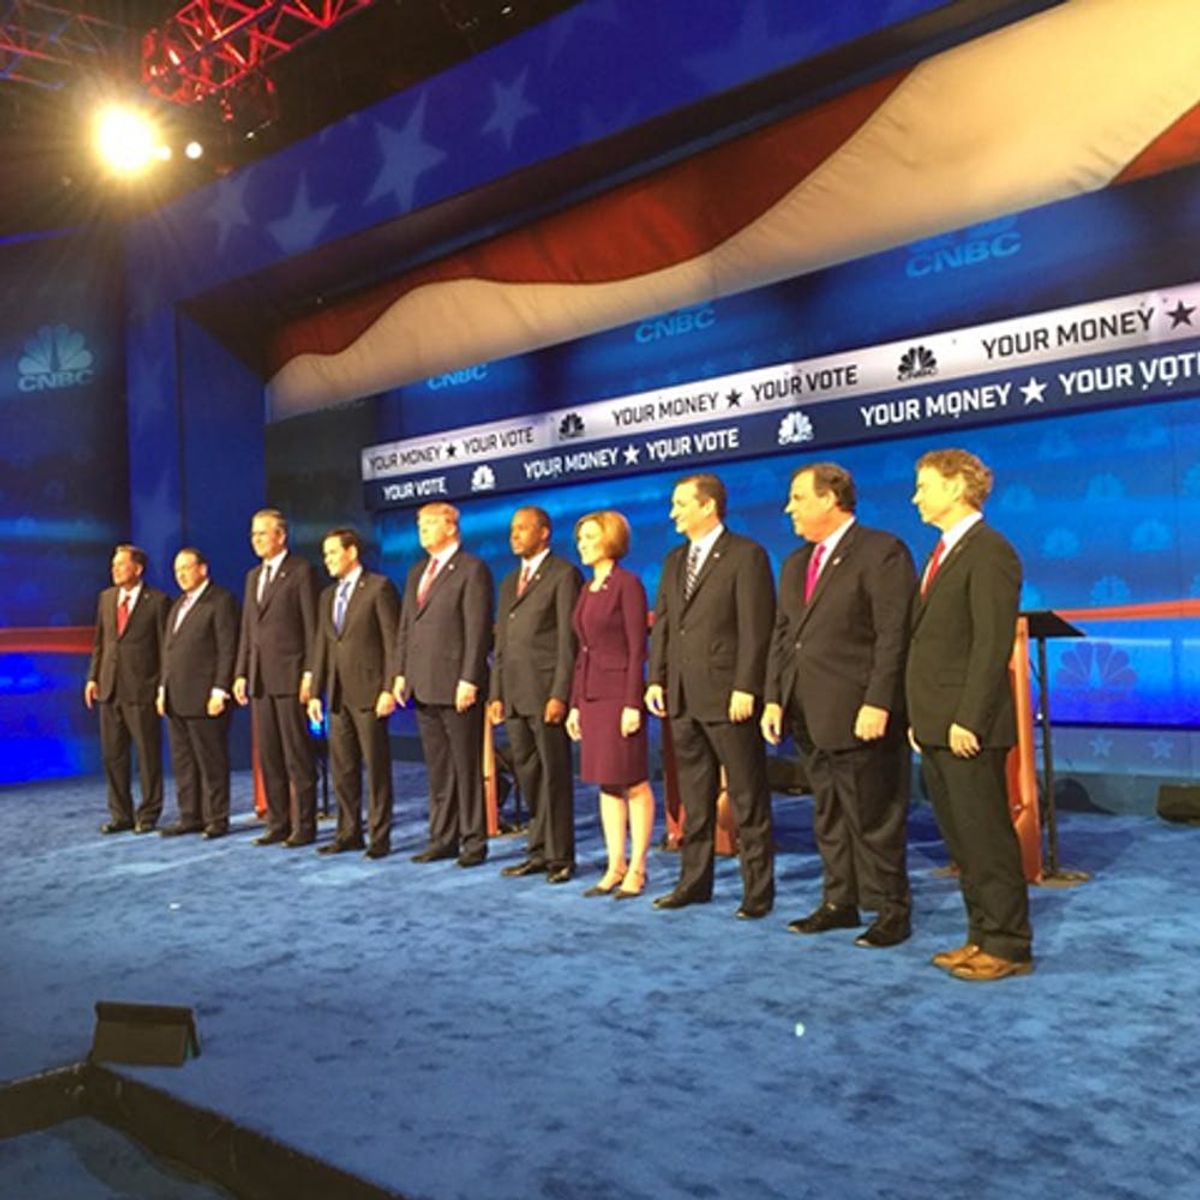 The Funniest Tweets from Tonight’s #GOPDebate